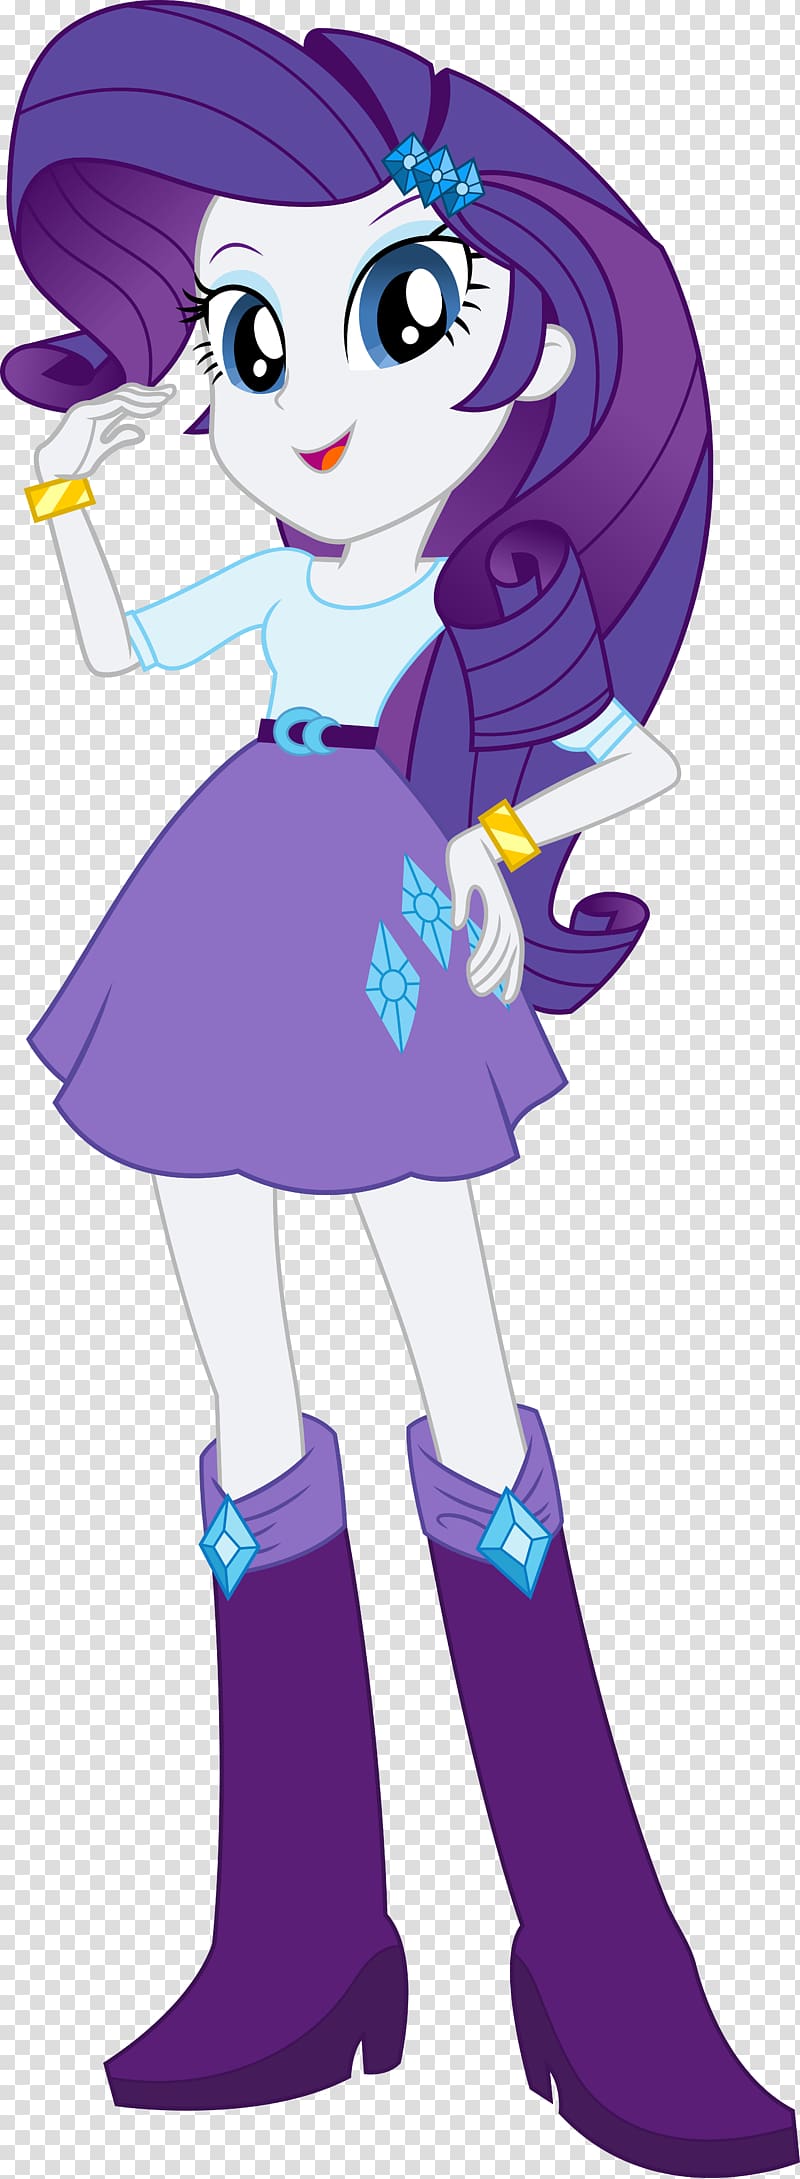 Rarity Twilight Sparkle My Little Pony: Equestria Girls Rainbow Dash, equestria girls fluttershy in love transparent background PNG clipart